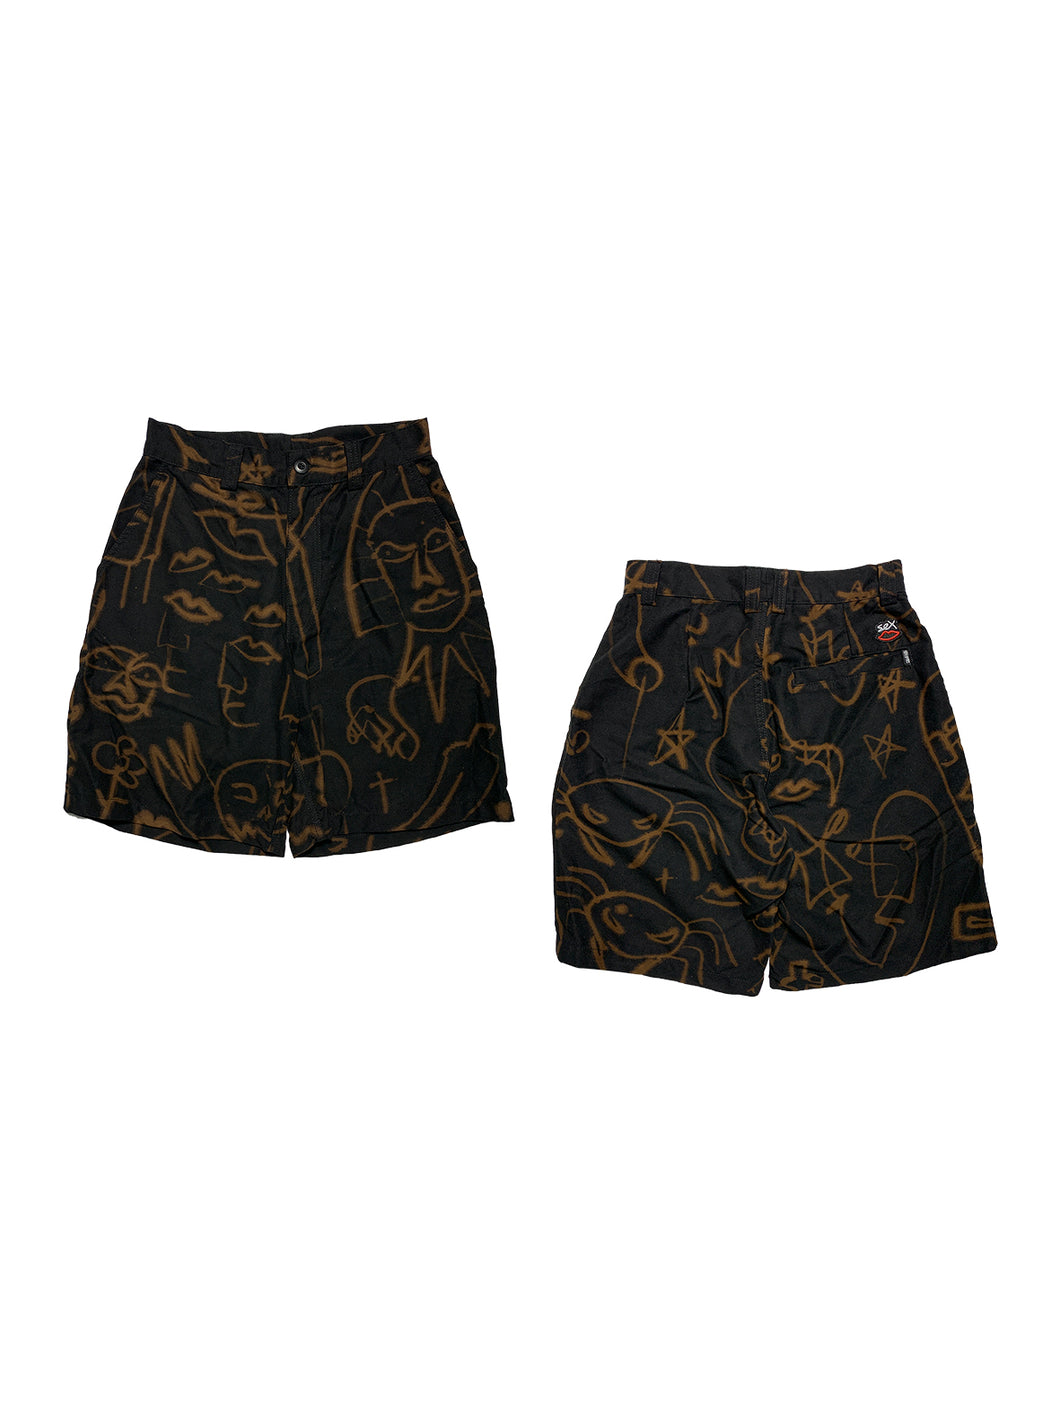 (1/1) - TWILL SHORTS by LOUIS SLATER